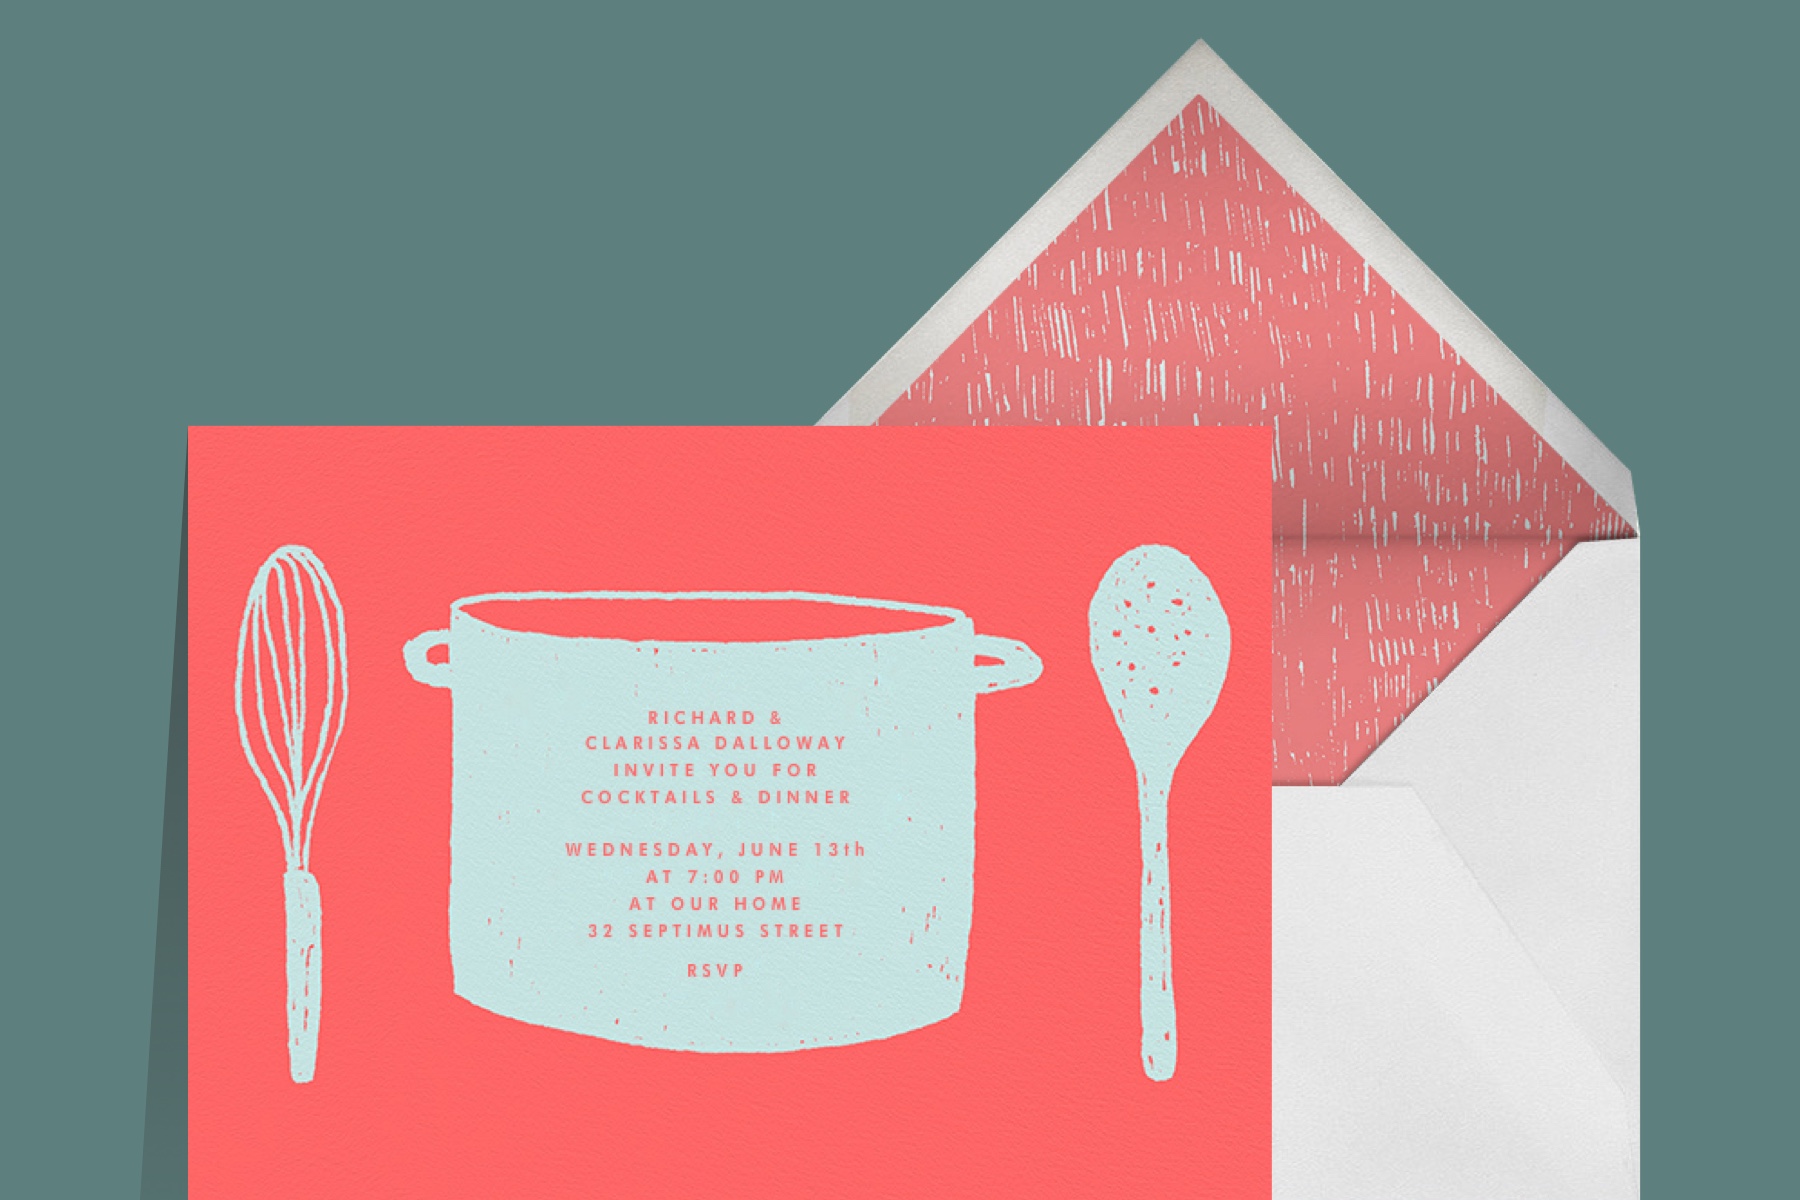 An invitation shows an illustration of a cooking pot with a whisk and spoon. 